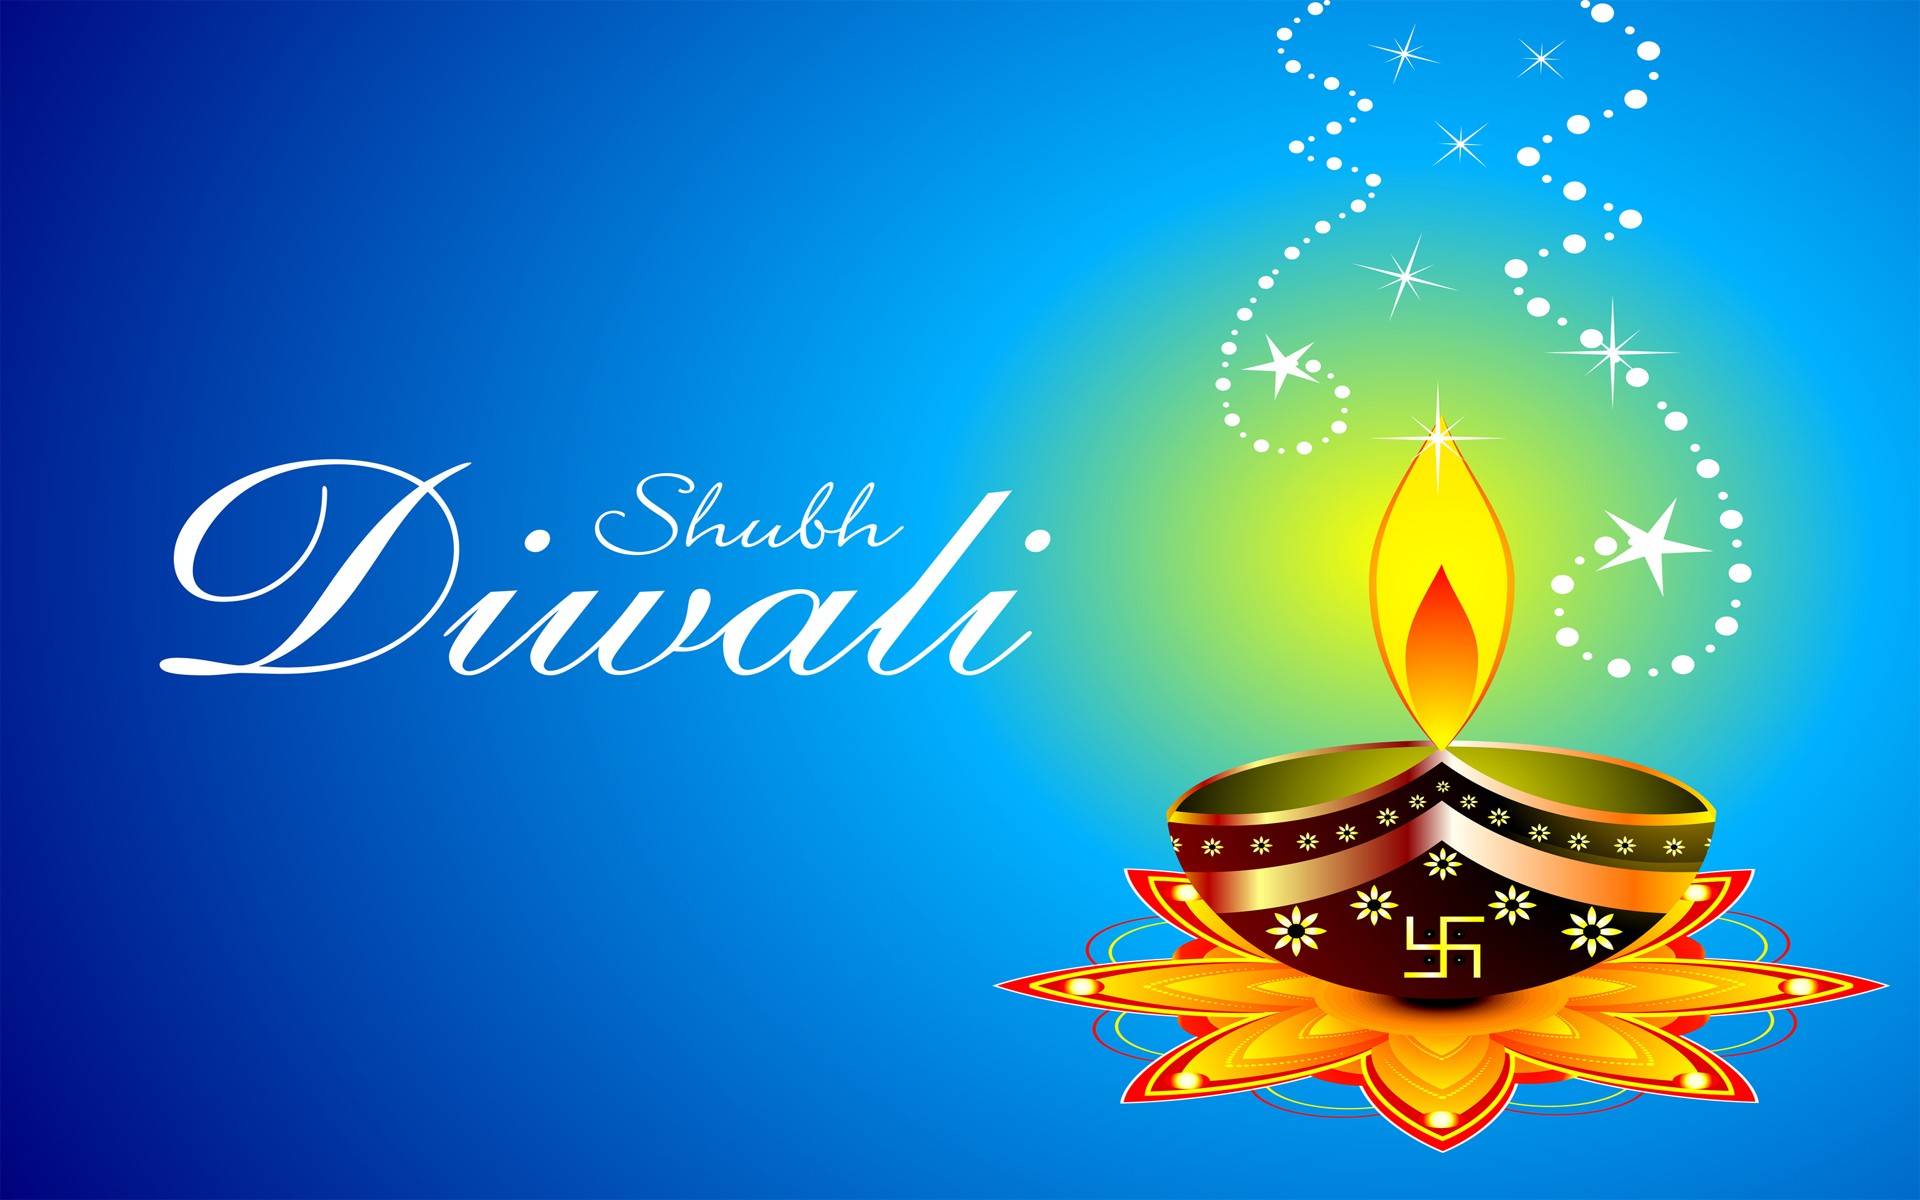 Happy Diwali Images, HD Wallpapers for Facebook and Whatsapp